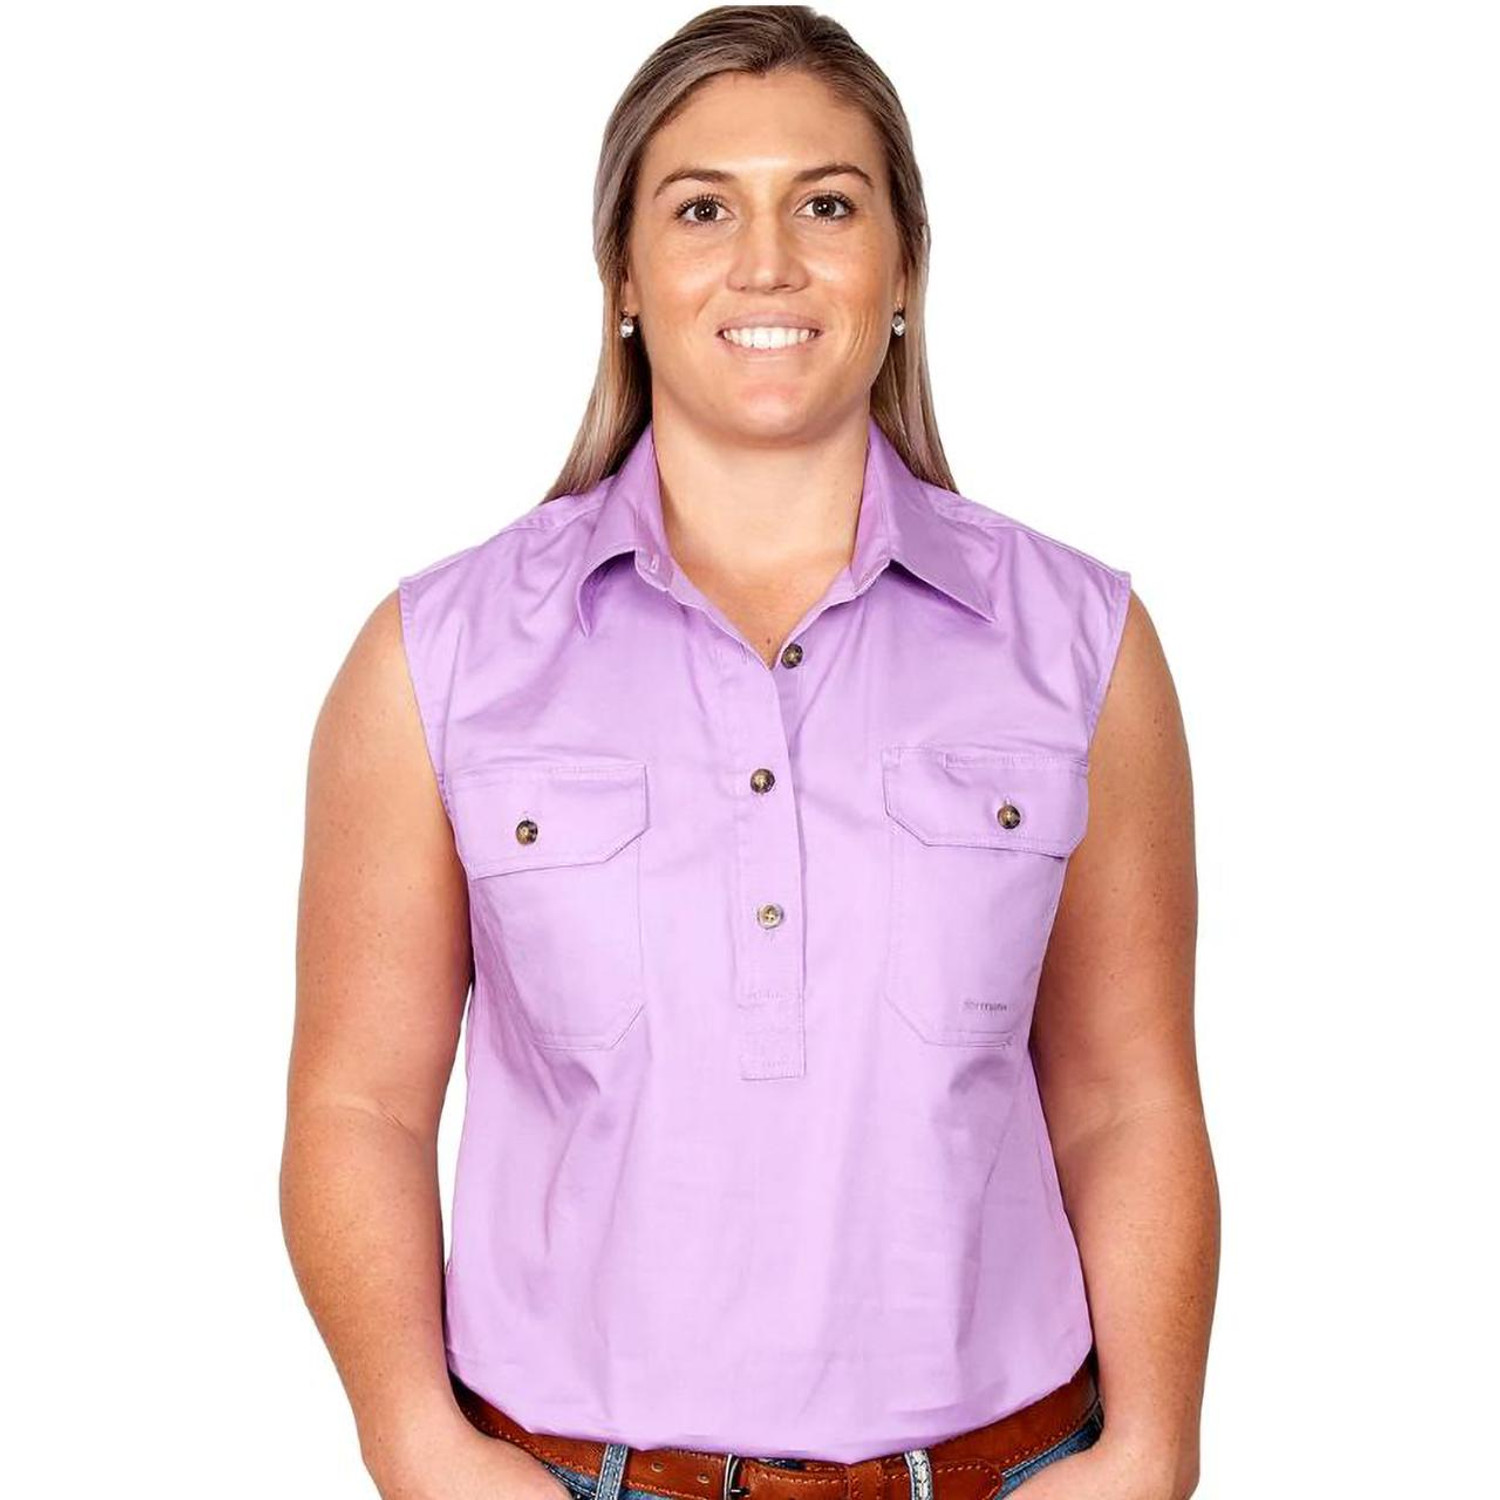  Just Country 50503 Ladies Kerry Closed Front Sleeveless Shirt  in Orchid(Bulk Buy Deal, Buy 4 or more Just Country Adults Shirts for $44.95 Each!) 